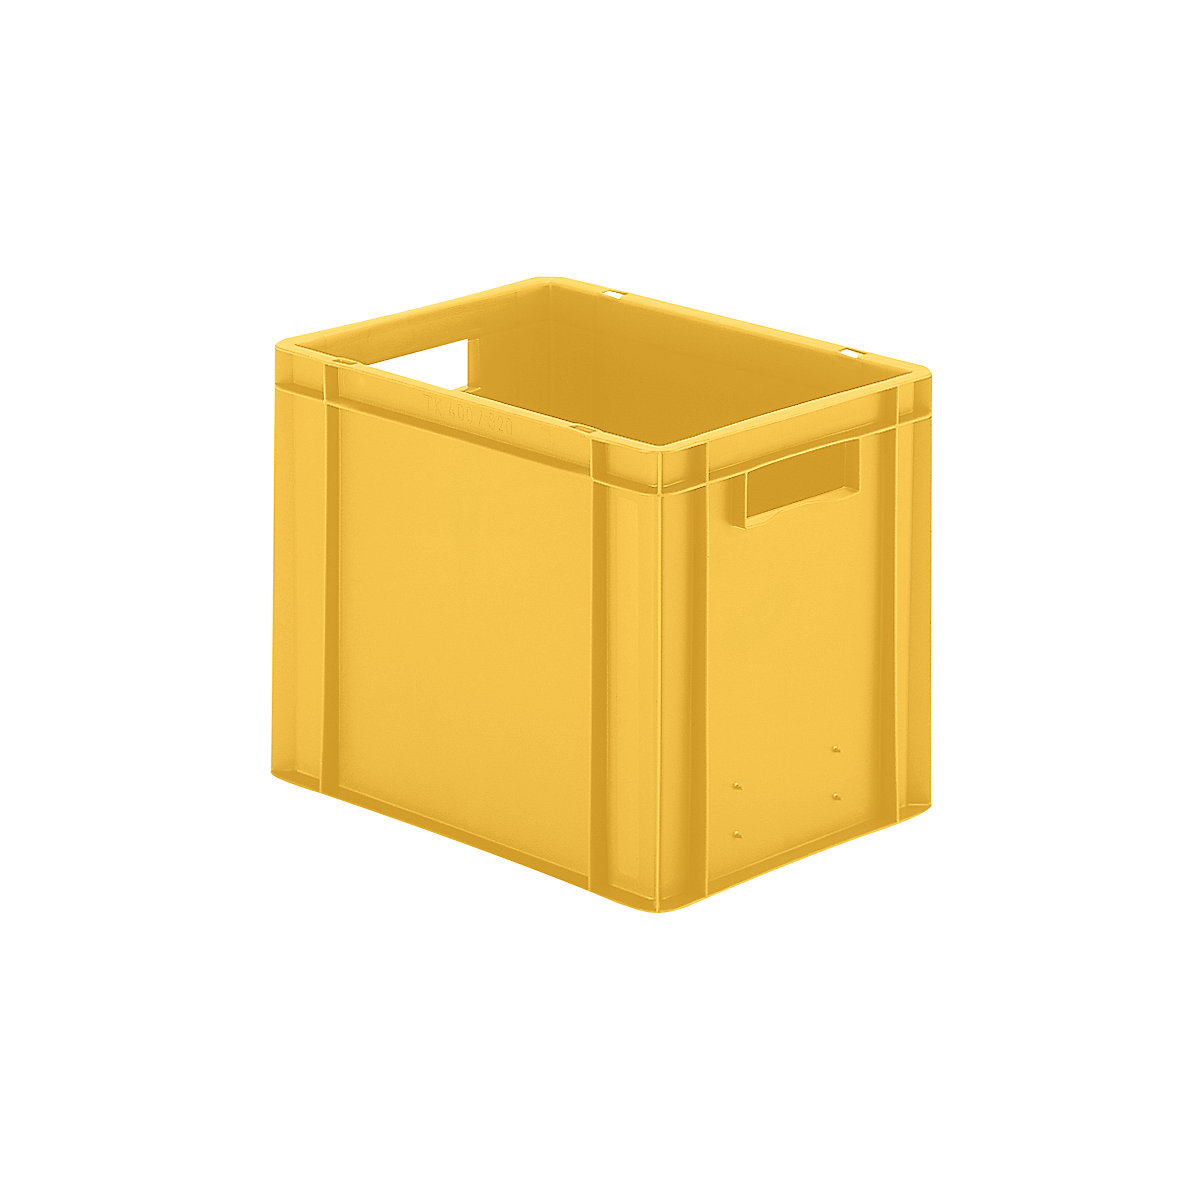 Euro stacking container, closed walls and base, LxWxH 400 x 300 x 320 mm, yellow, pack of 5